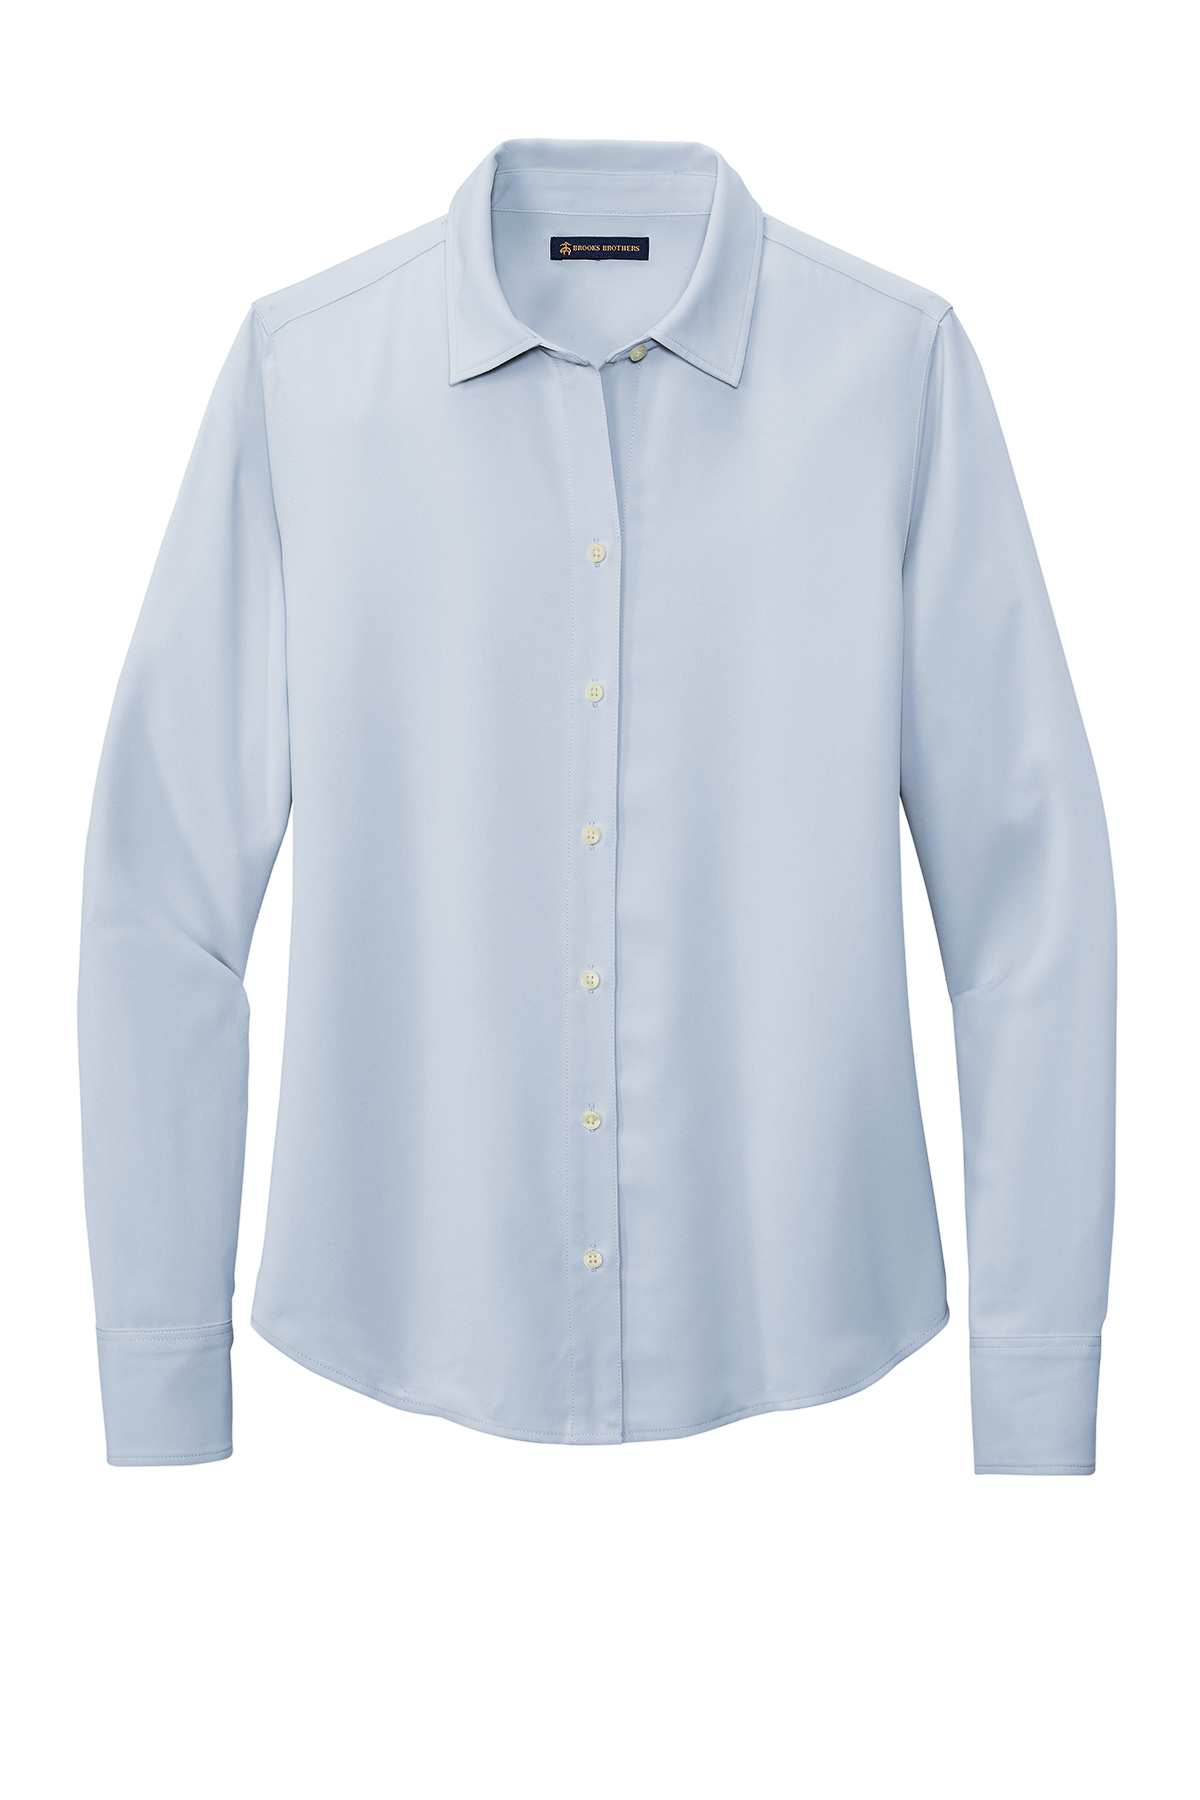 Brooks Brothers Women's Blouse